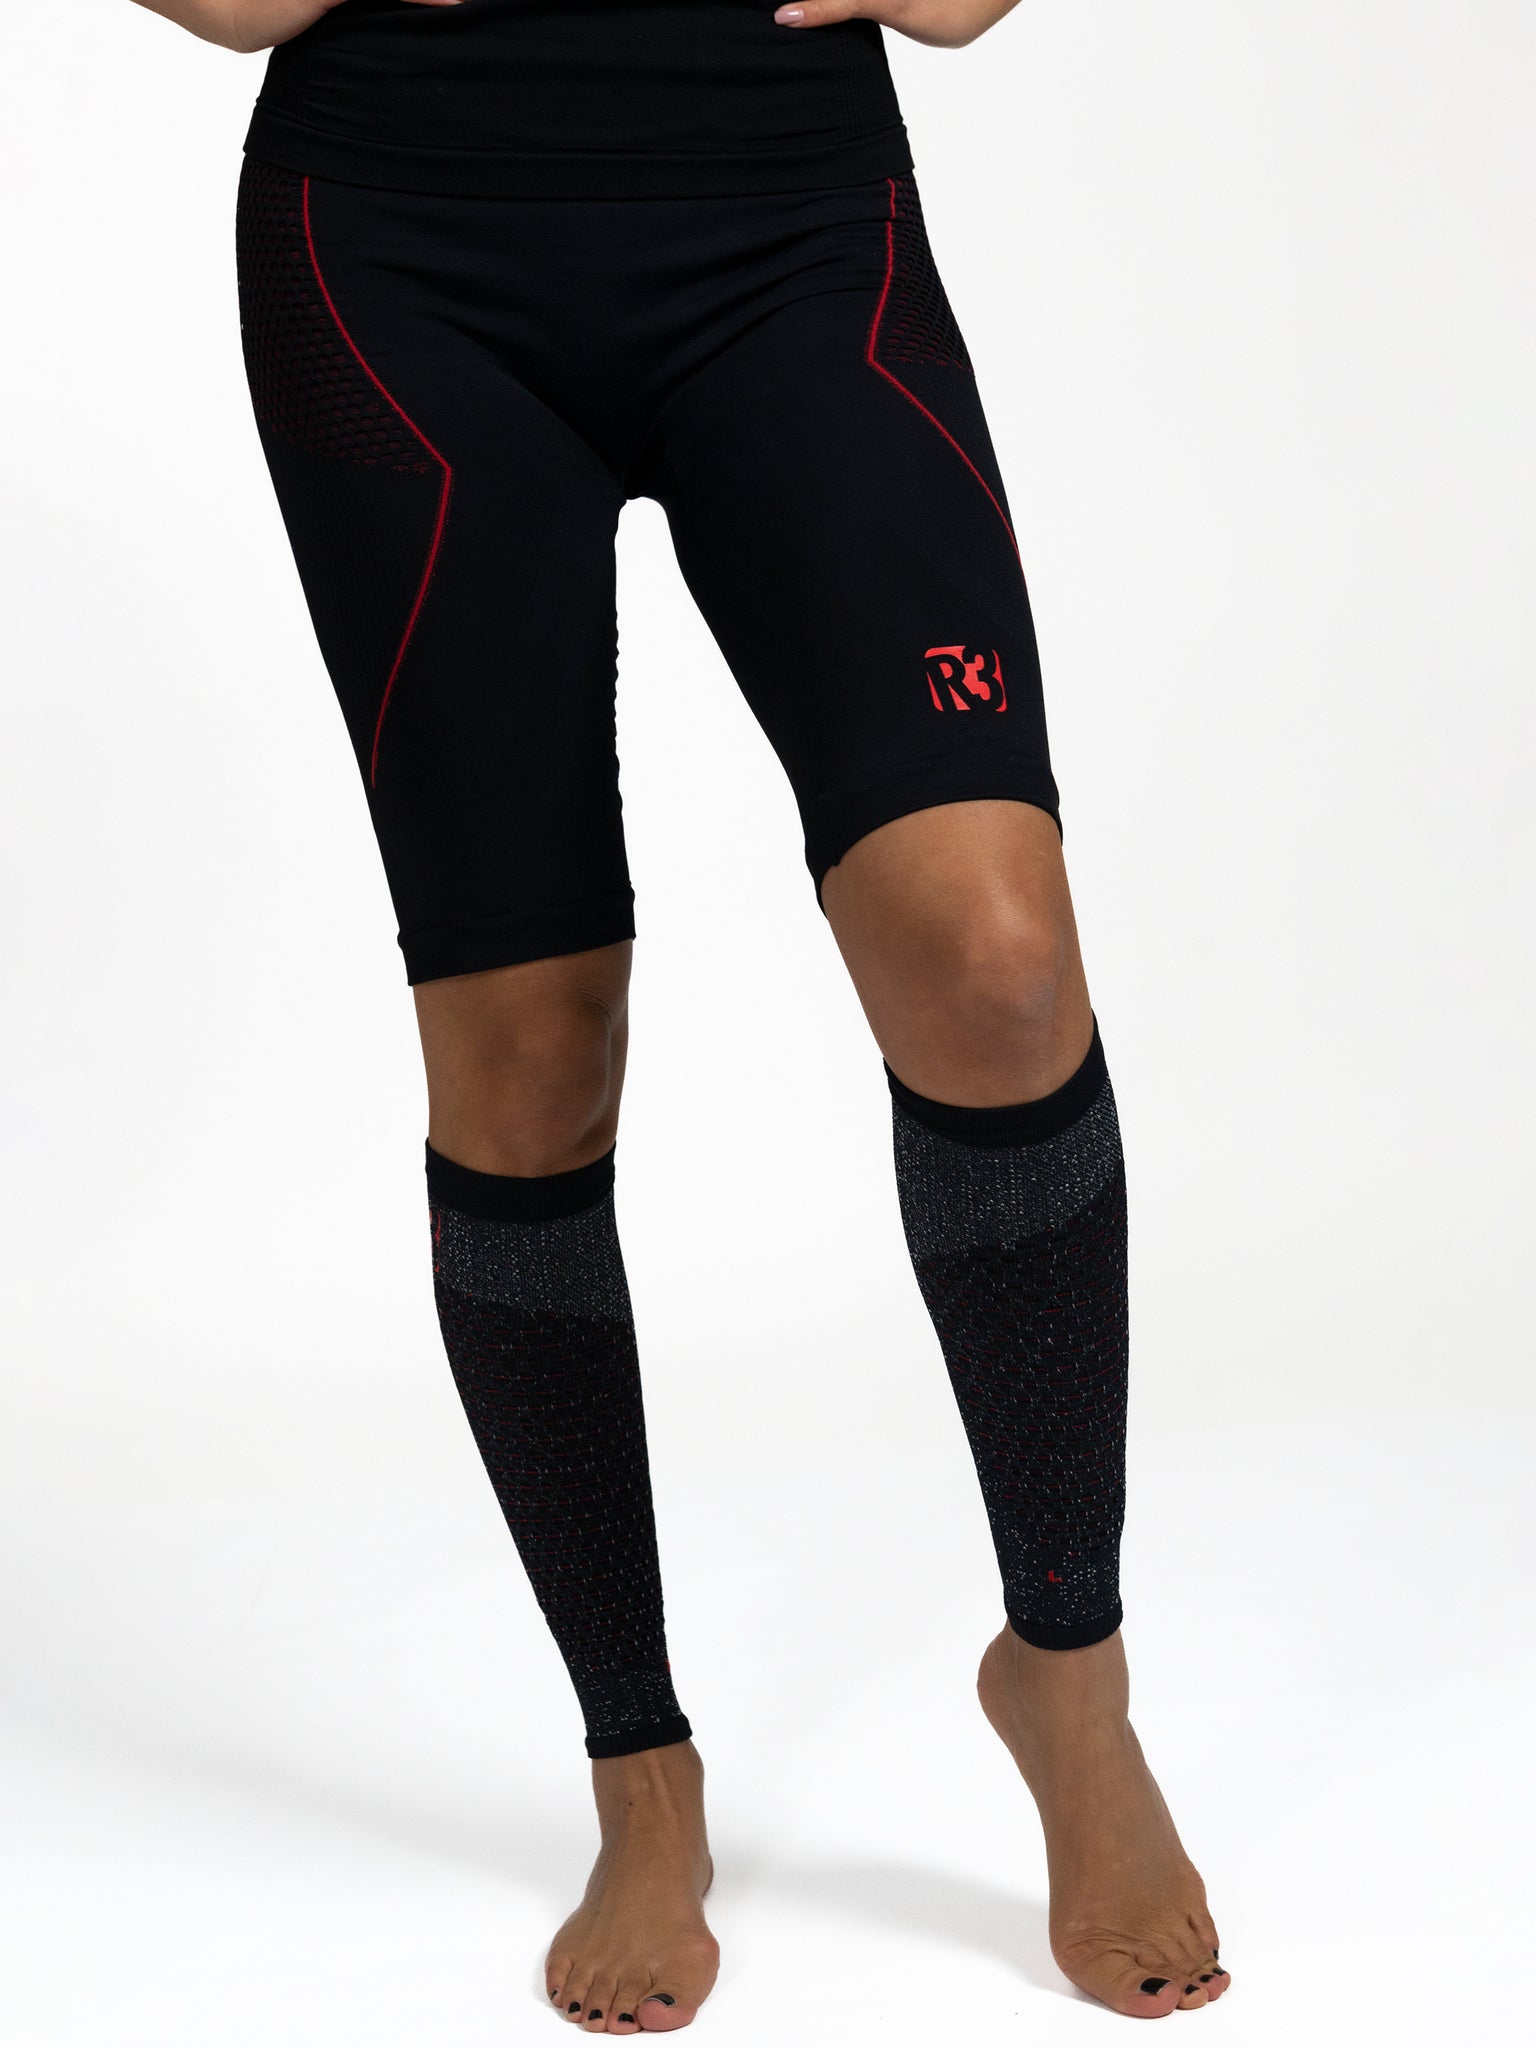 Gambale Calf Compression Unisex Black/Red